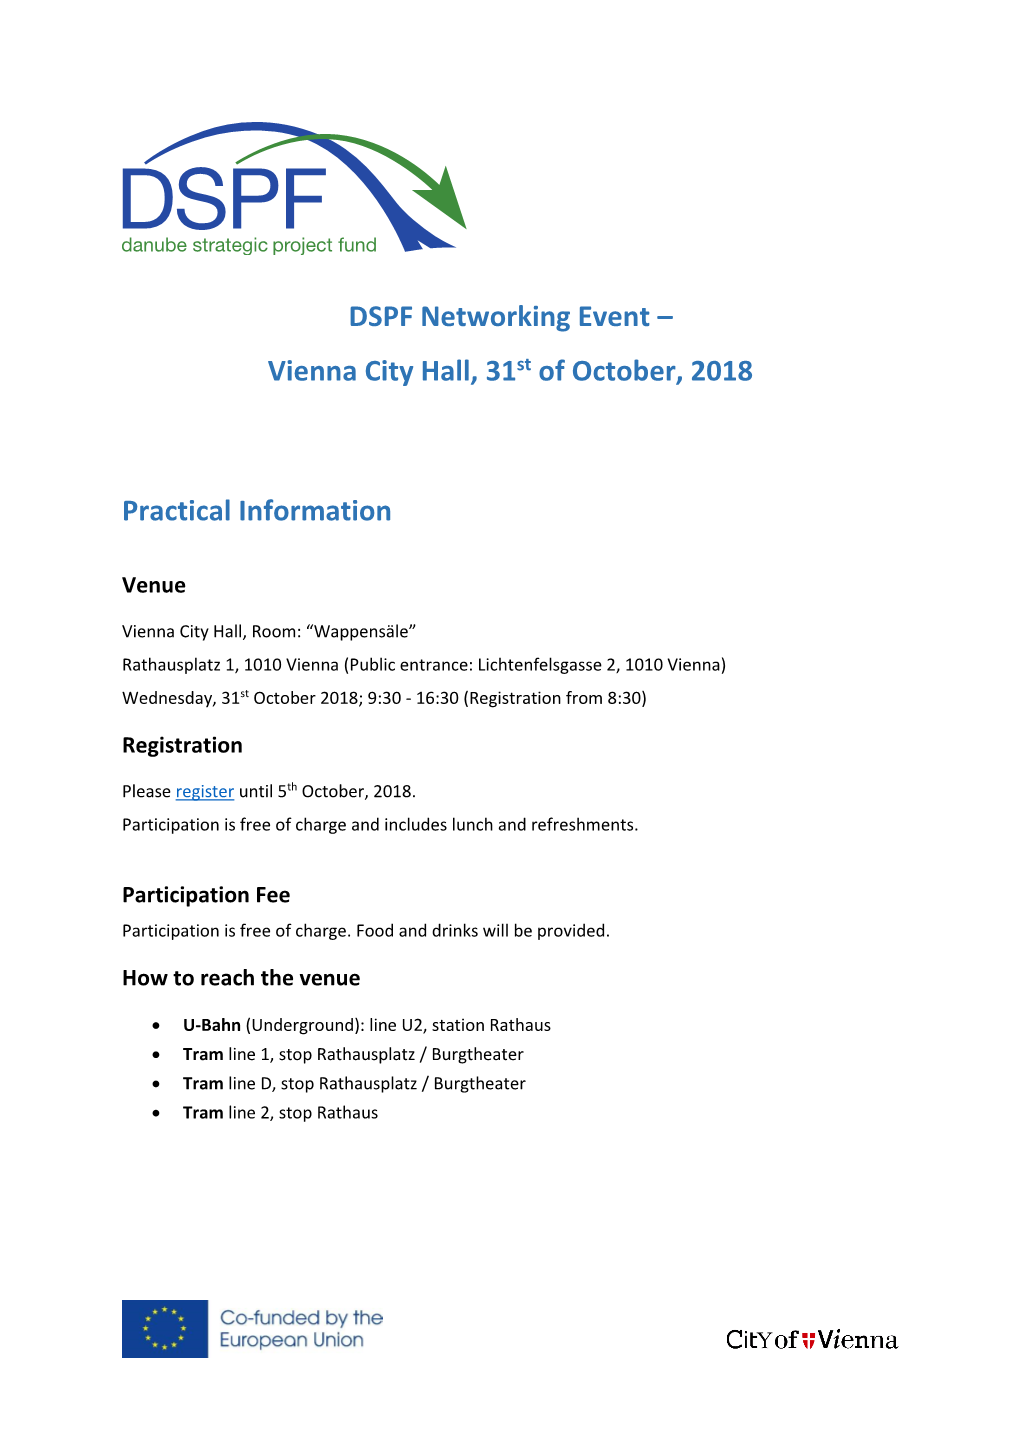 DSPF Networking Event – Vienna City Hall, 31St of October, 2018